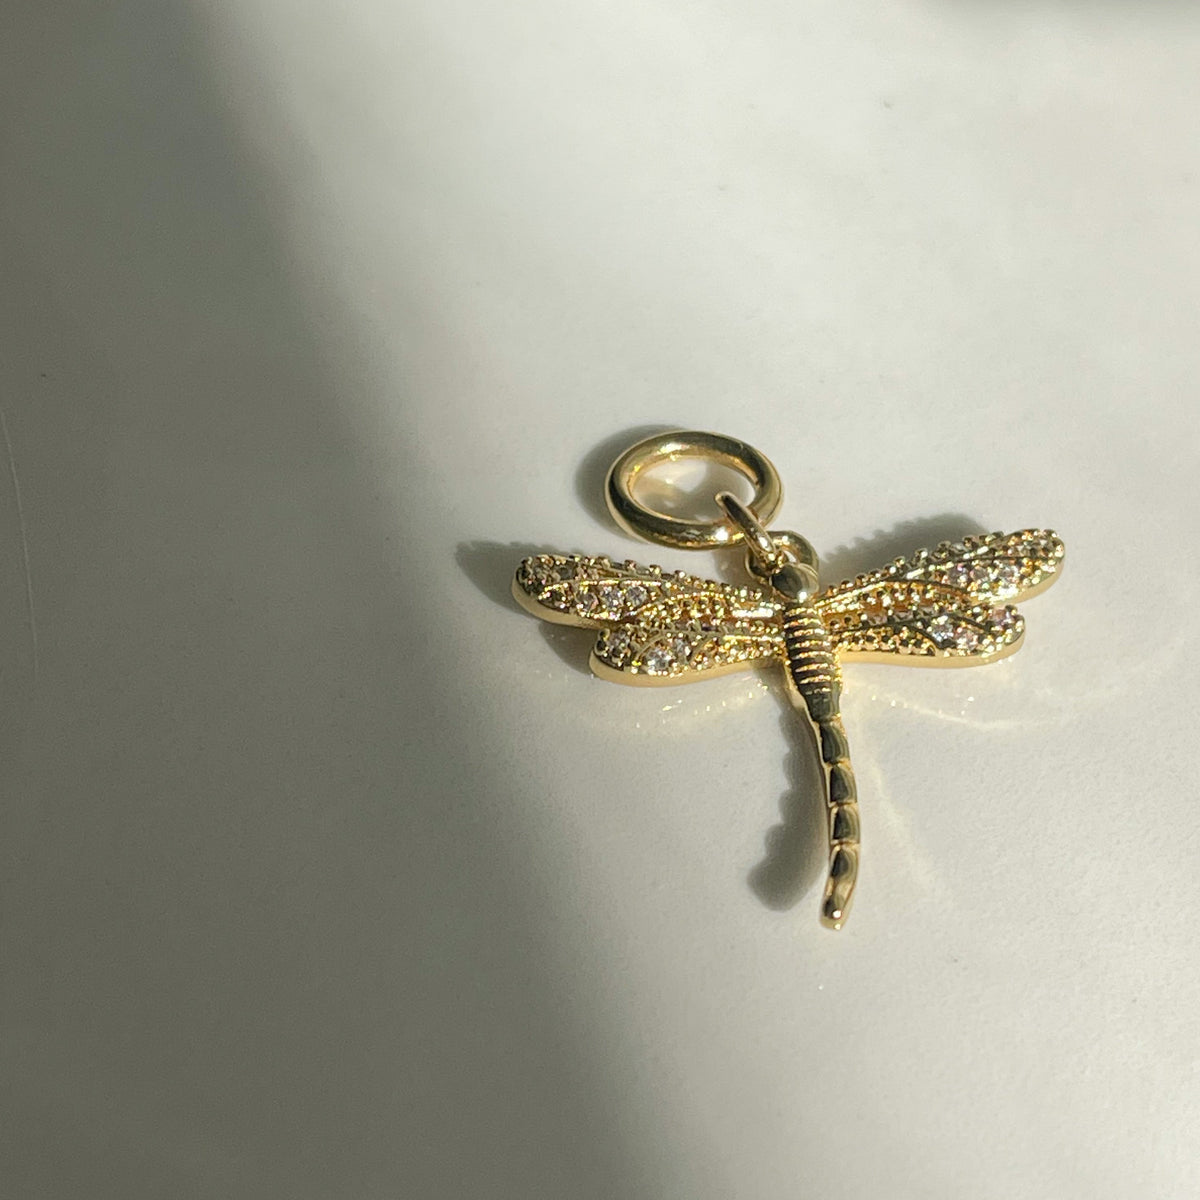 The Dragon Fly Charm